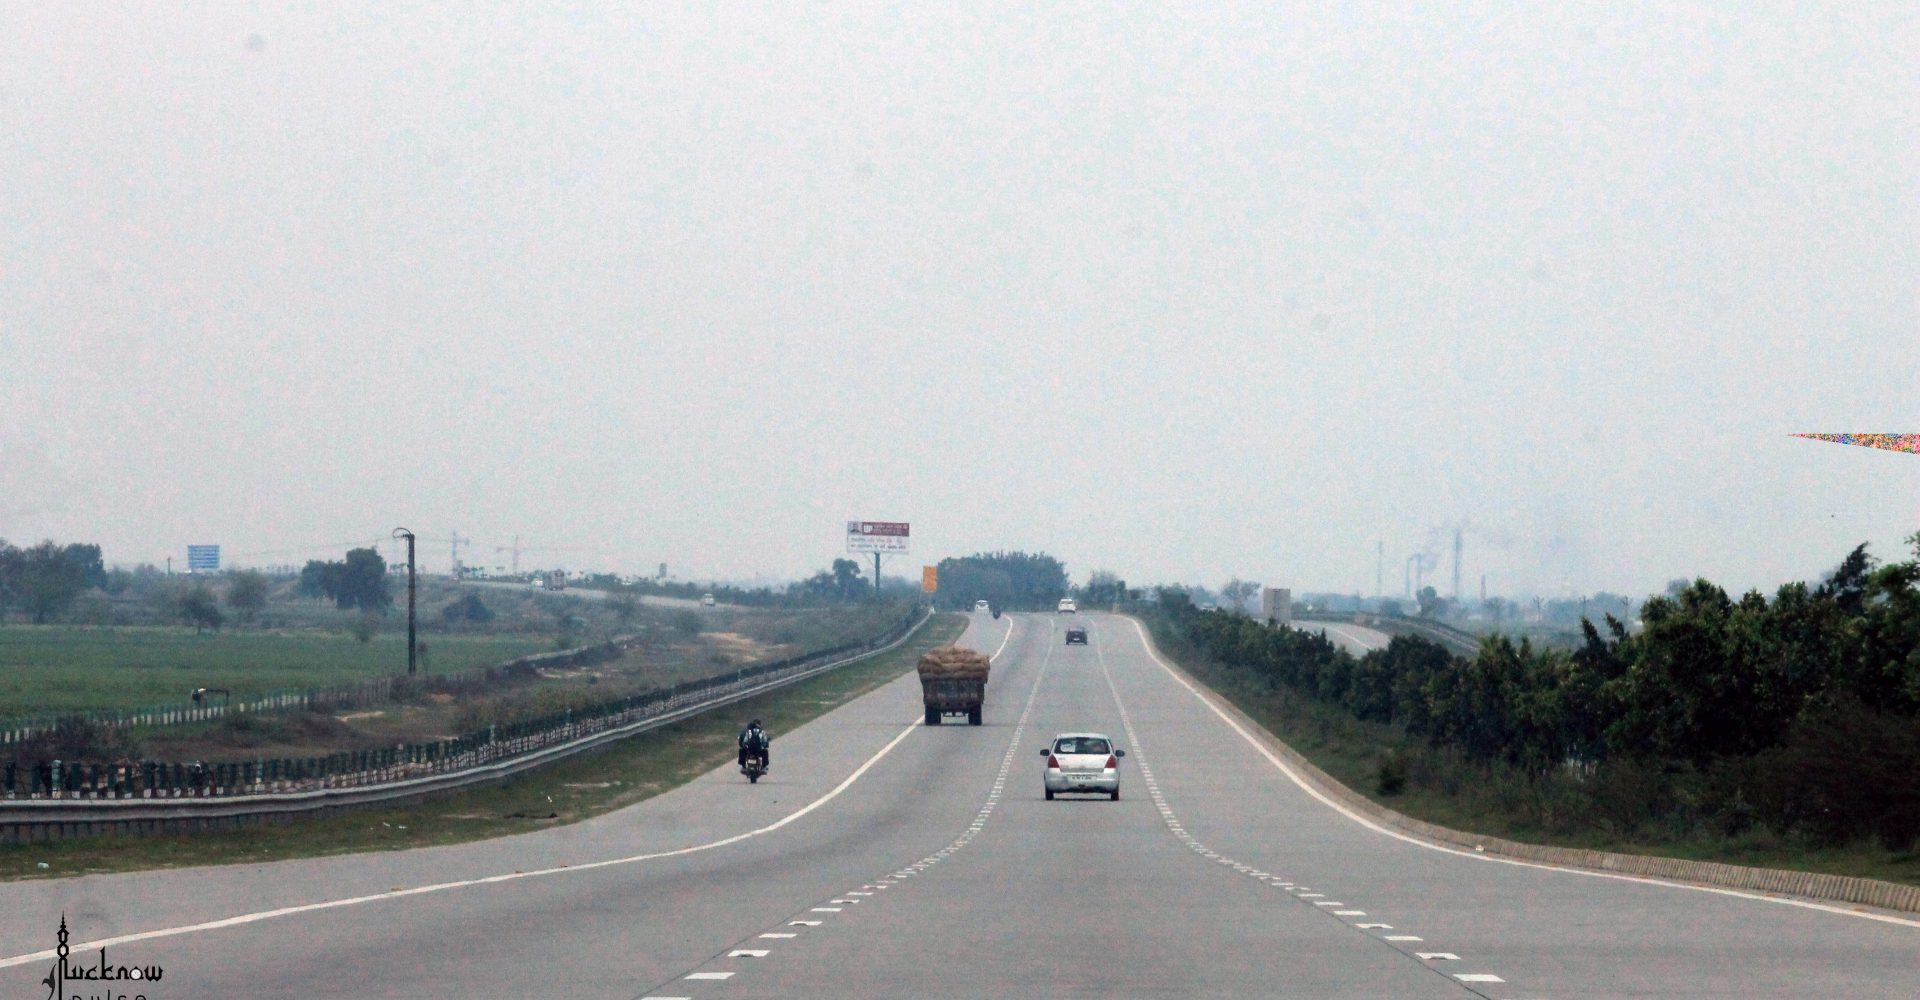 A picture of agra expressway